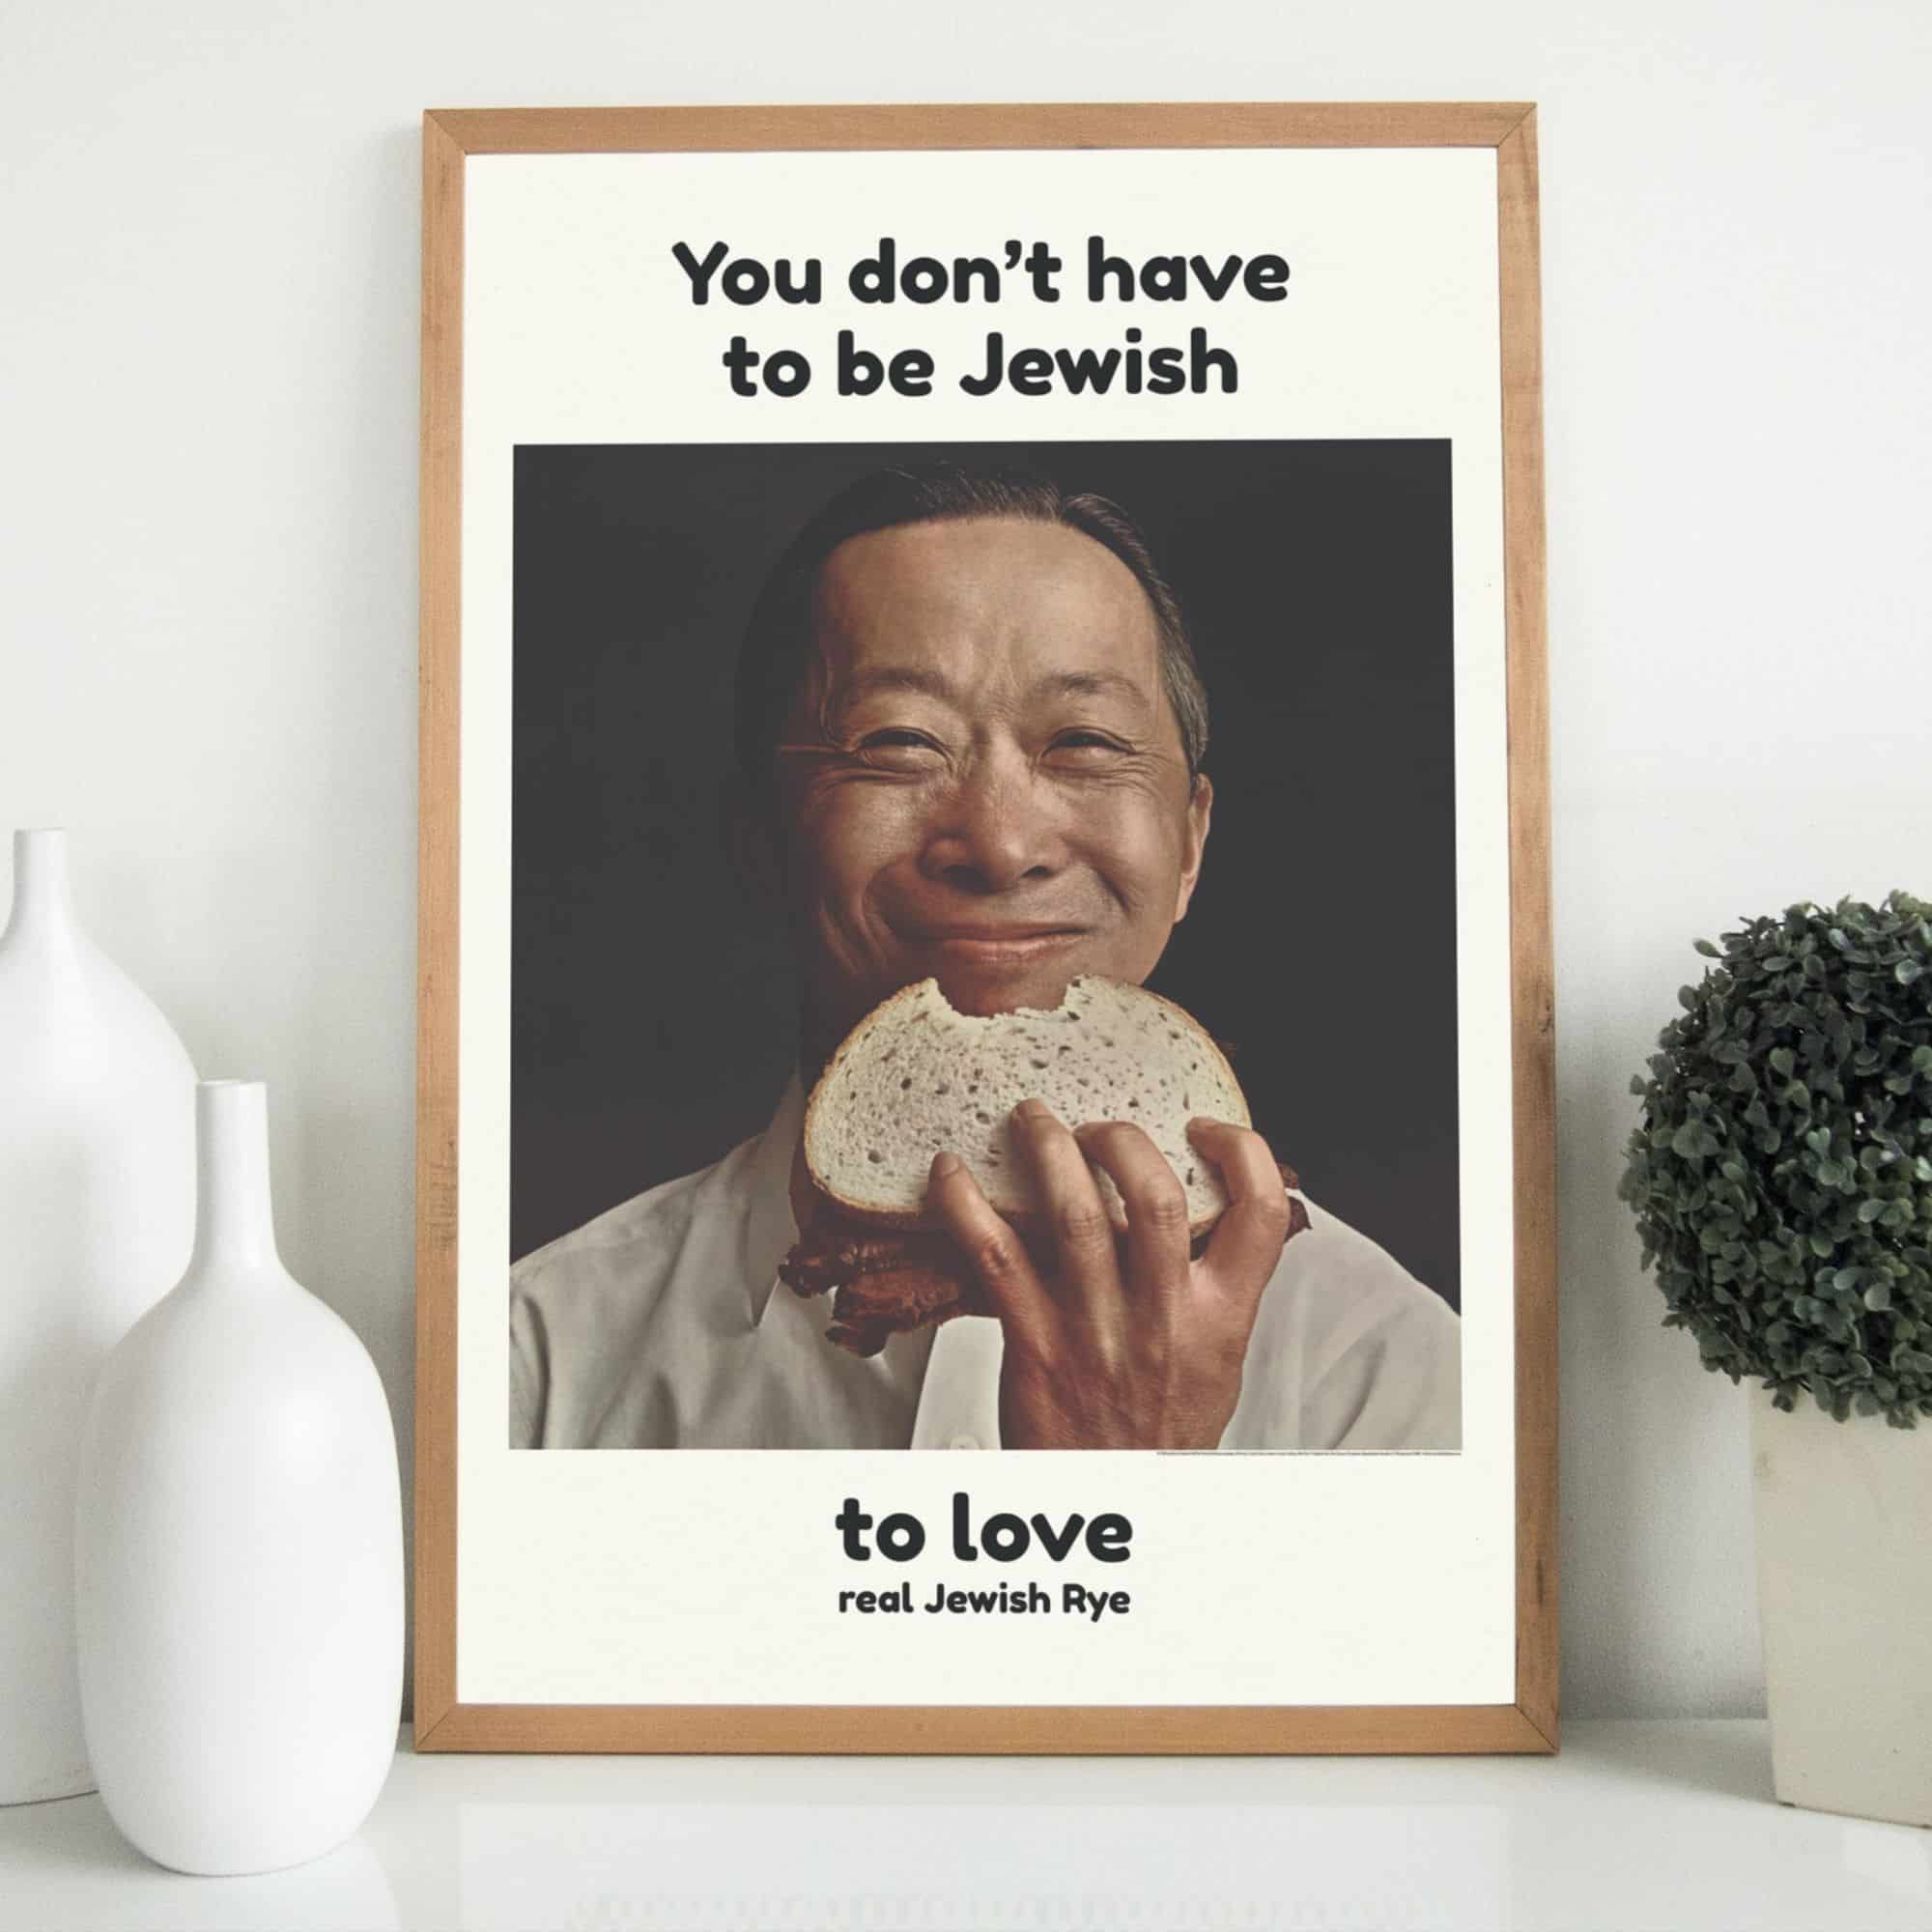 Vintage advertisement remix featuring diverse New Yorkers enjoying Jewish rye bread, celebrating New York's ethnic diversity and the legacy of Judy Protas' iconic campaign.